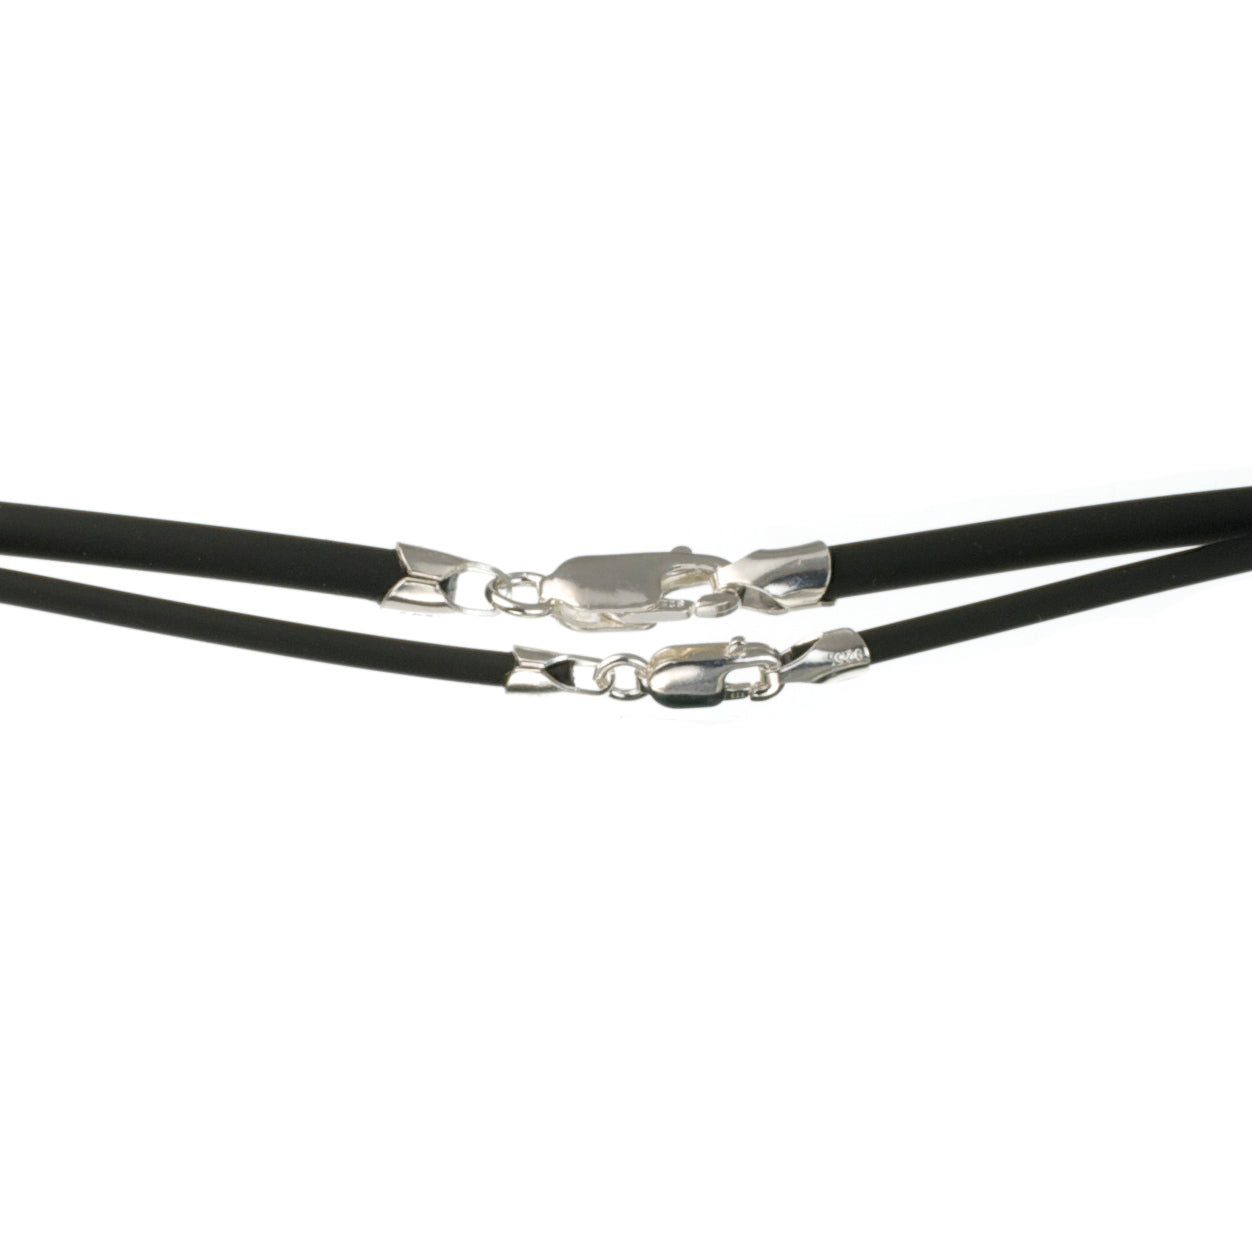 Black Neoprene Cord with Silver Clasp Necklace - The Tool Store